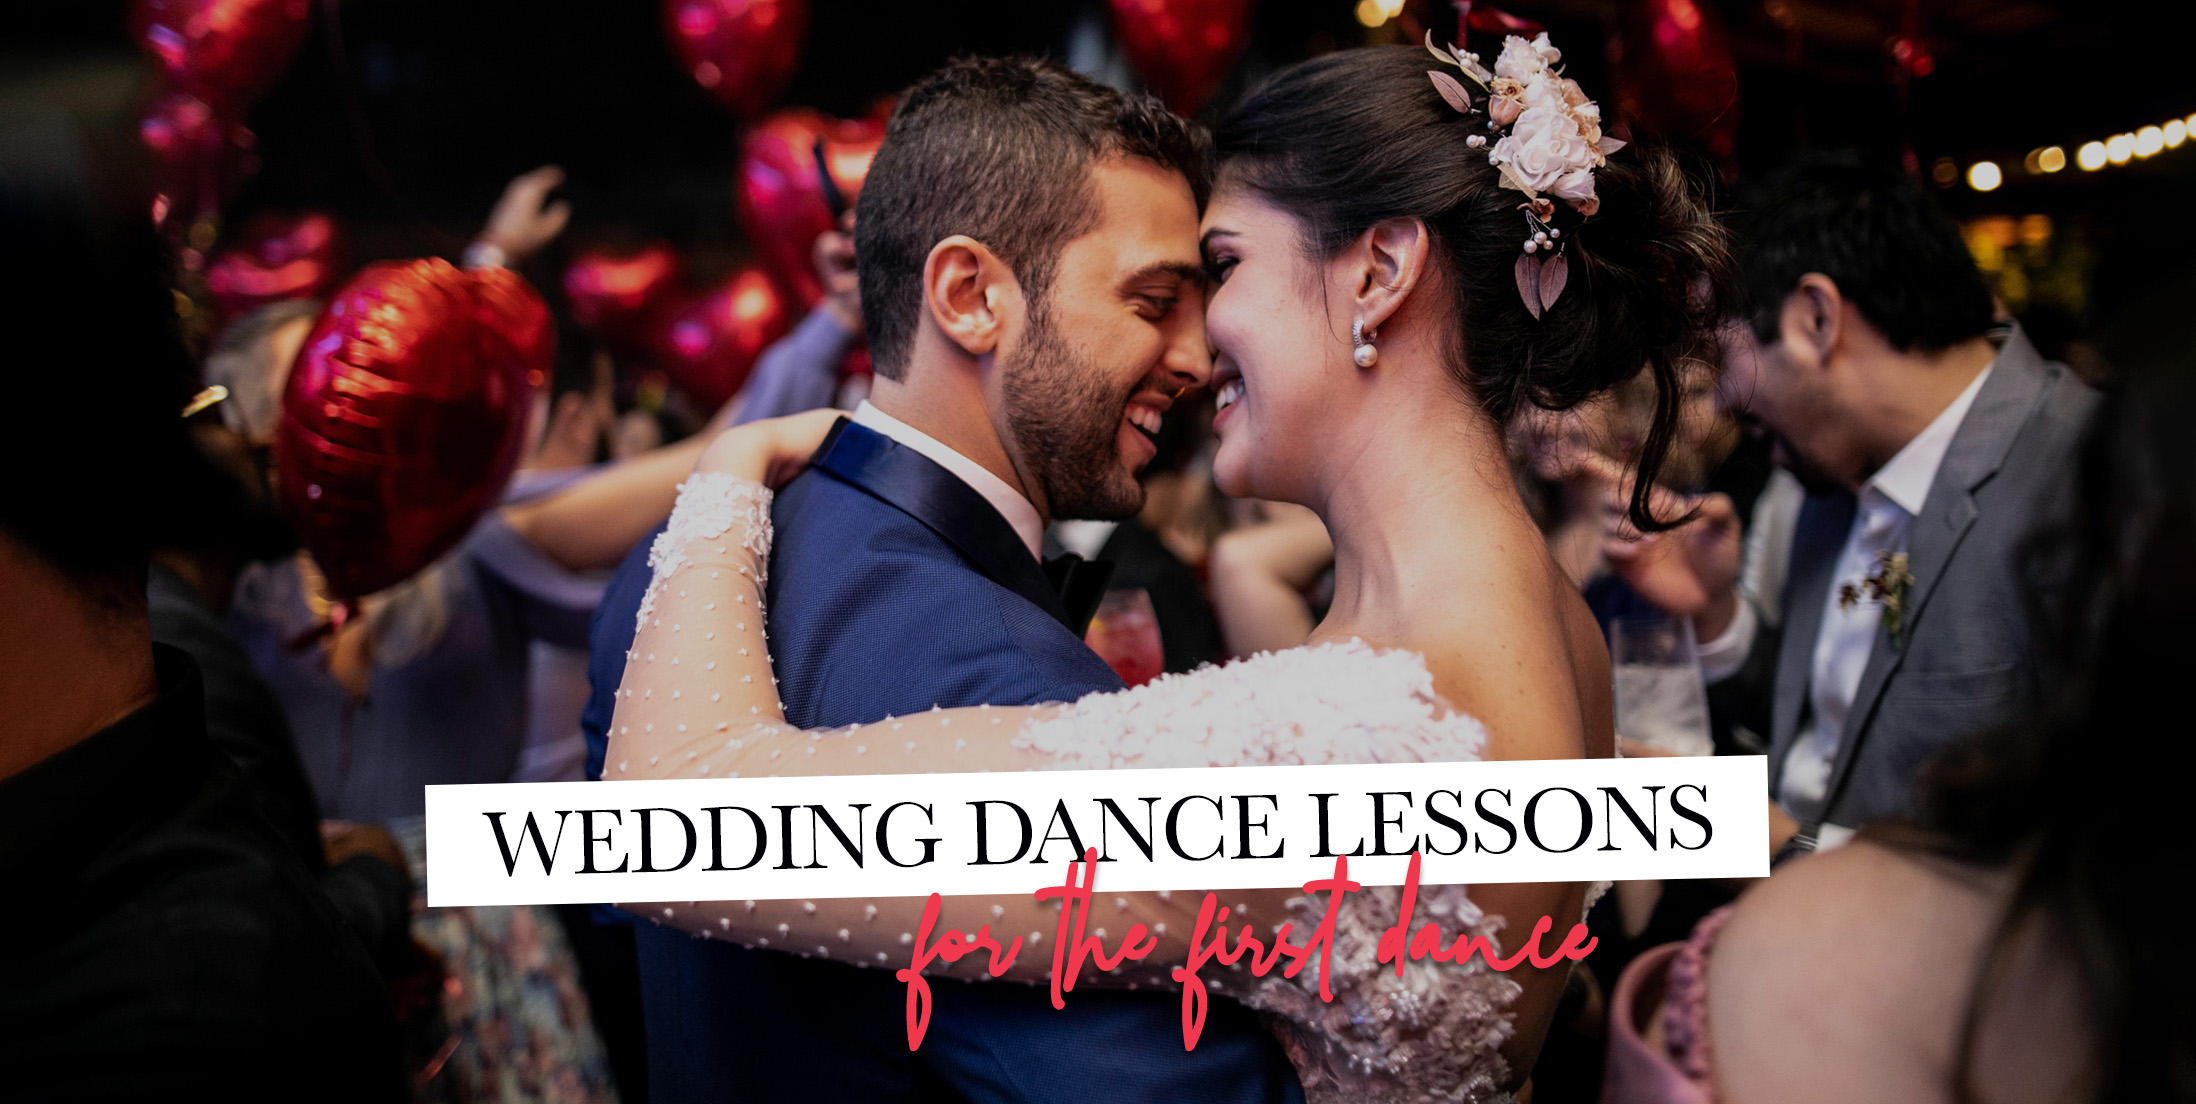 Wedding Dance Lessons for the First Dance (Banner)